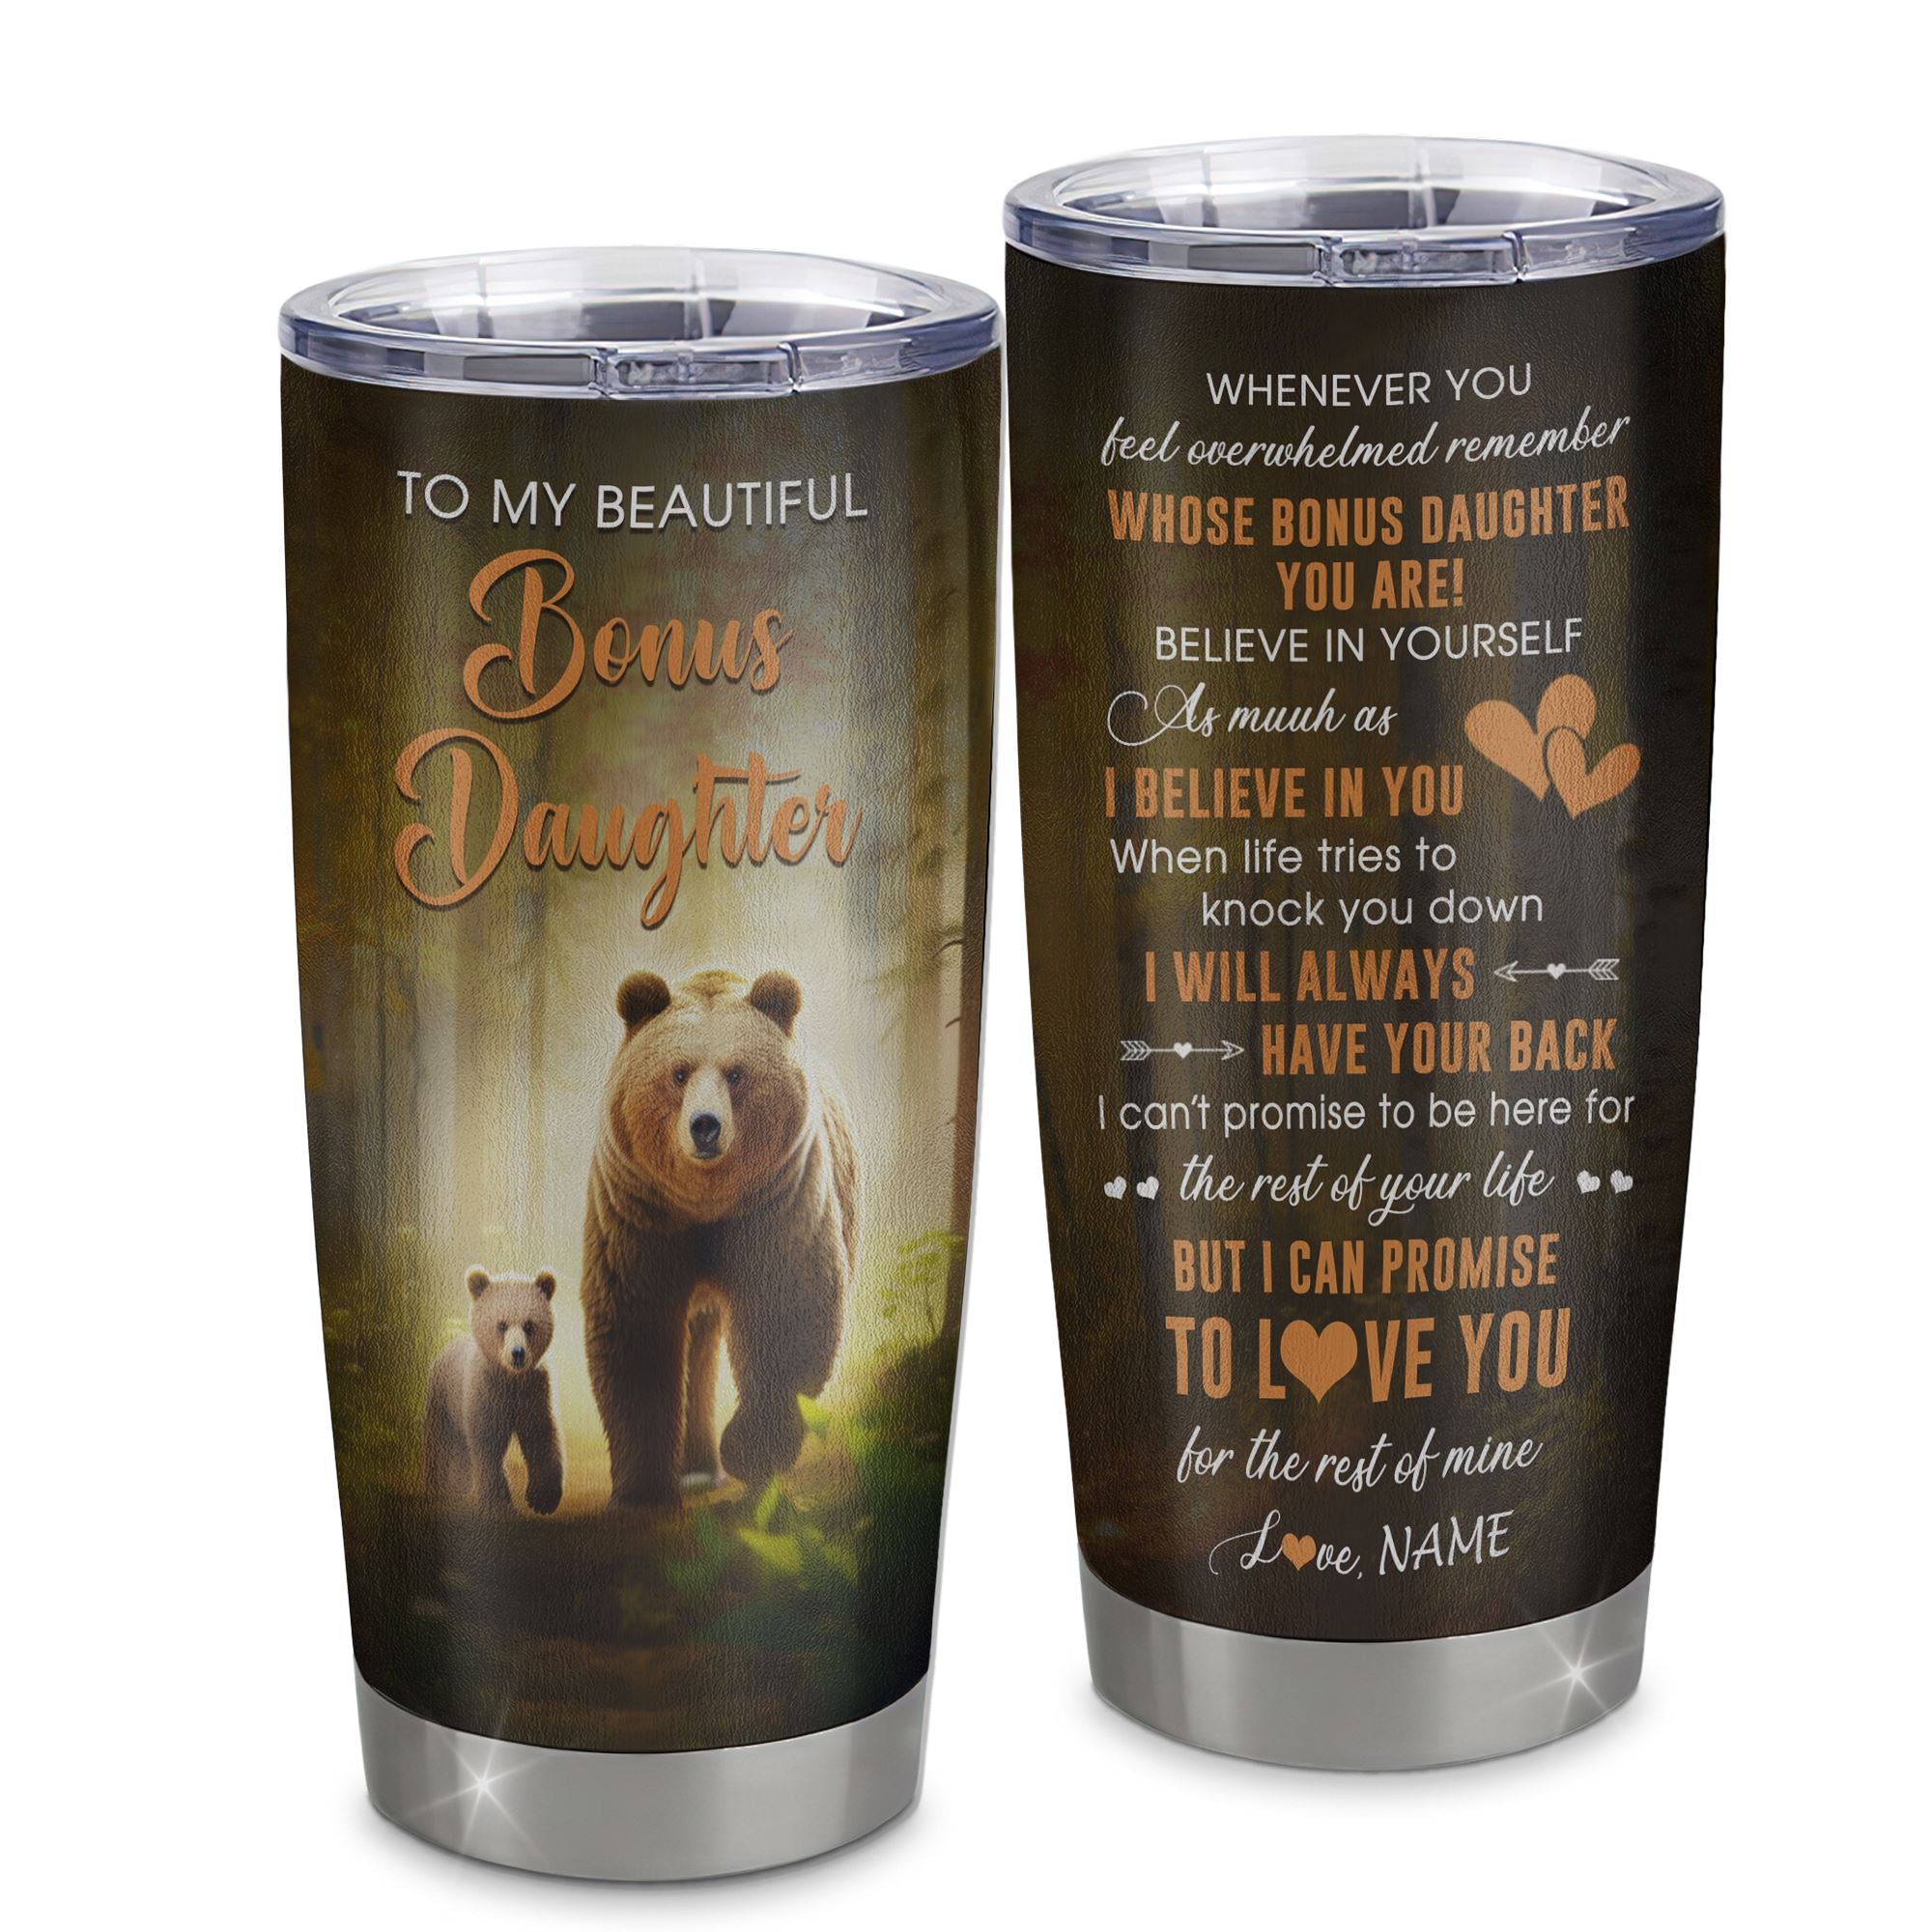 Personalized_To_My_Bonus_Daughter_Tumbler_From_Step_Mom_Dad_Stainless_Steel_Cup_Whenever_You_Feel_Bear_Stepdaughter_Birthday_Gifts_Graduation_Christmas_Custom_Travel_Mug_Tumbler_mocku-1.jpg